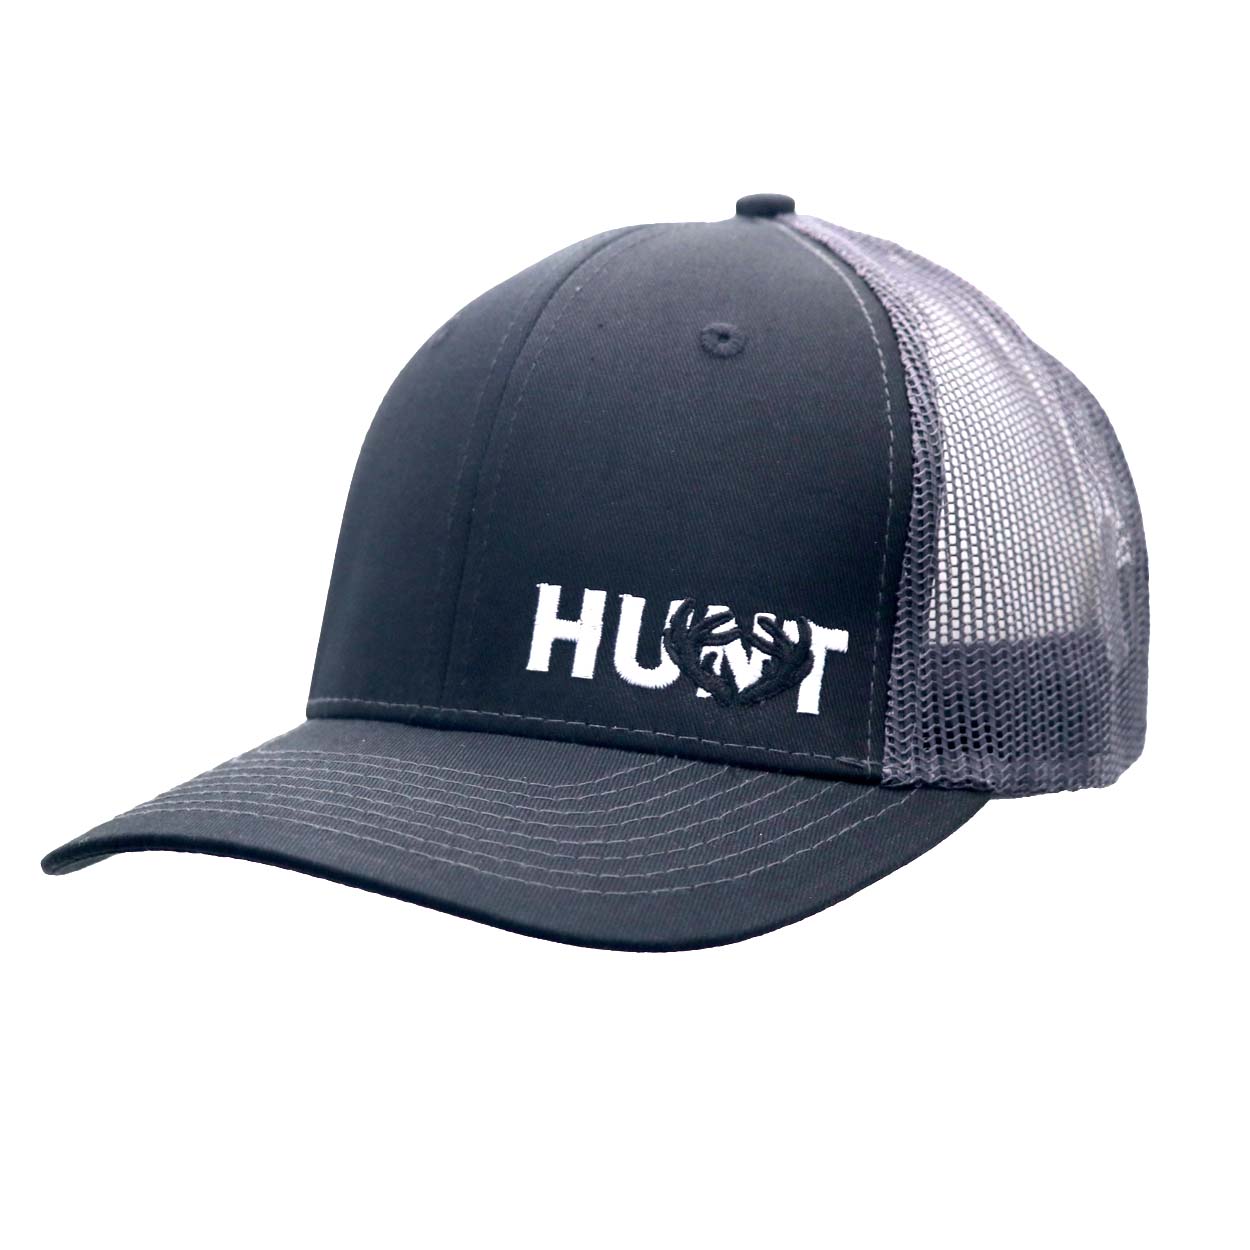 Hunt Rack Logo Classic Pro Night Out Embroidered Snapback Trucker Hat Black/Gray